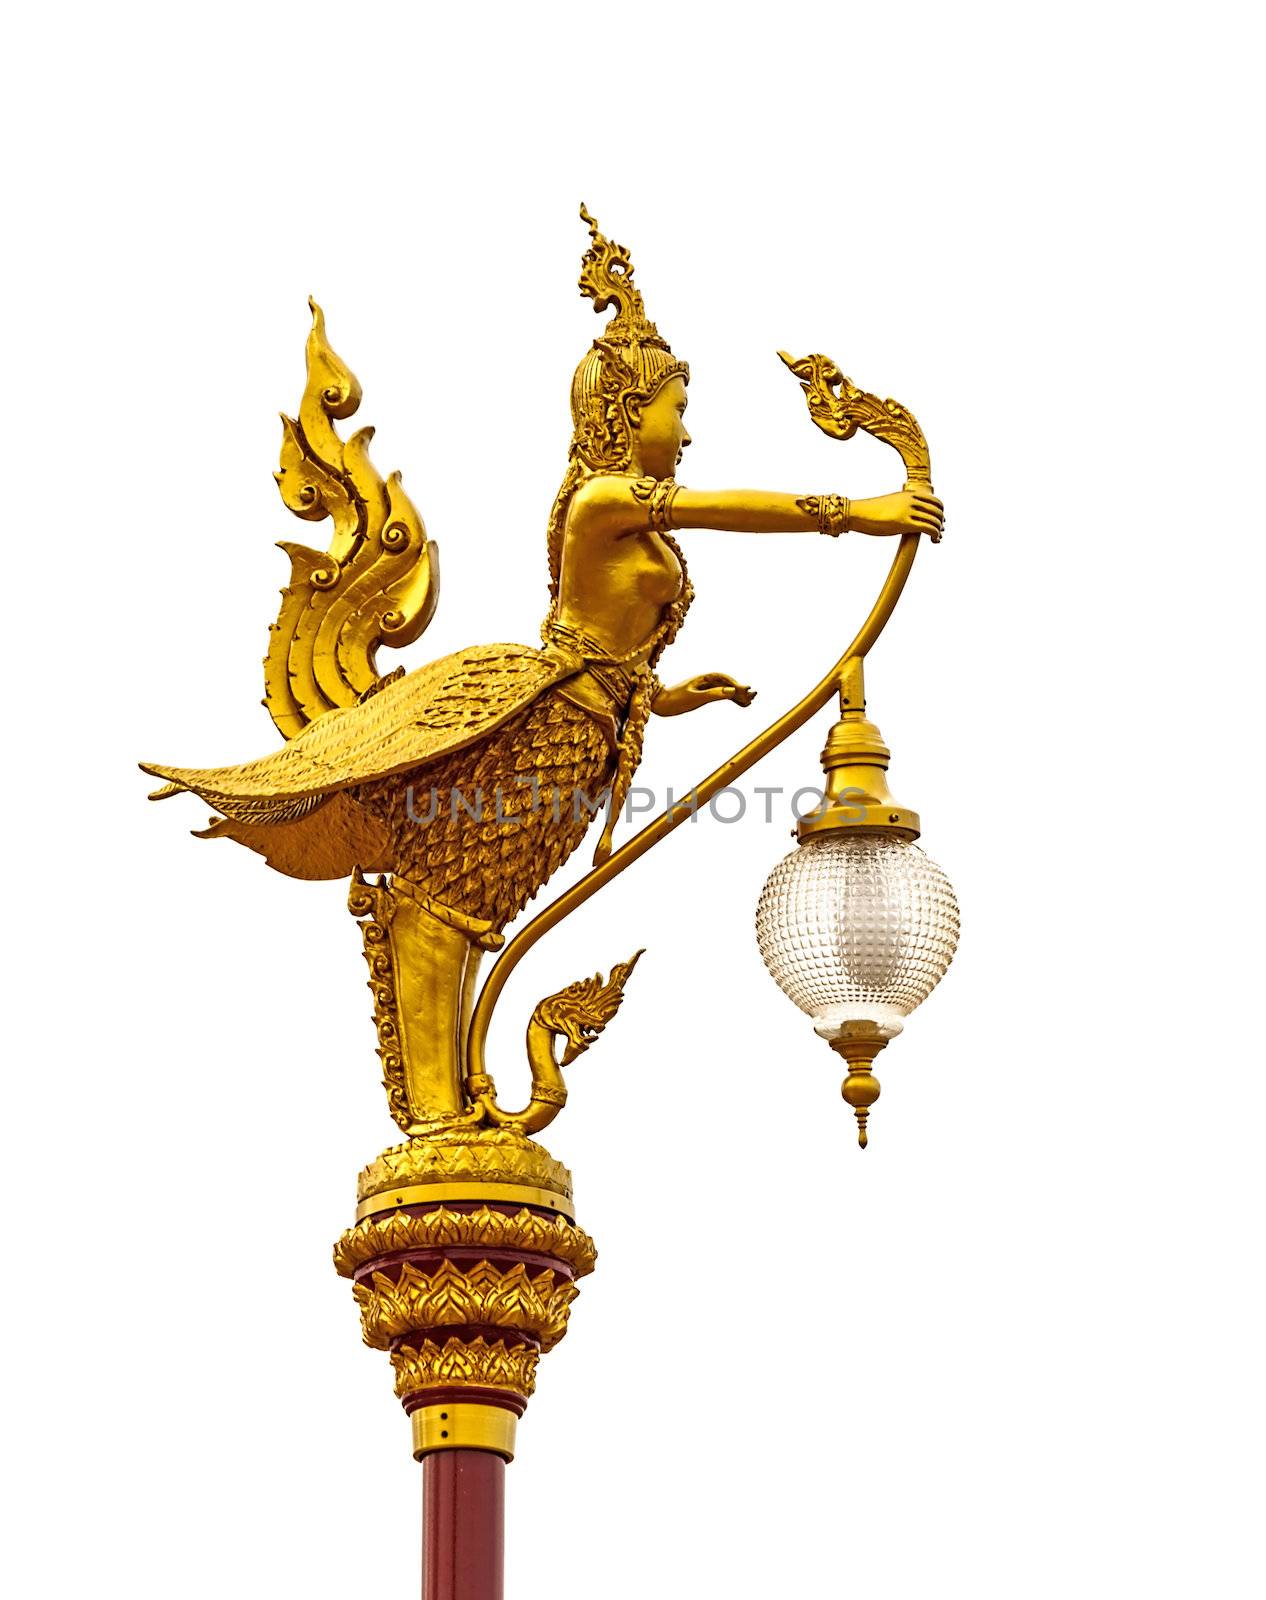 Isolated Half-bird lamp. Generality in Thailand, any kind of temple, art decorated in Buddhist church, temple etc. created with money donated by people to hire artist. They are public domain, no restrict in copy or use. This photo is taken under these conditions.